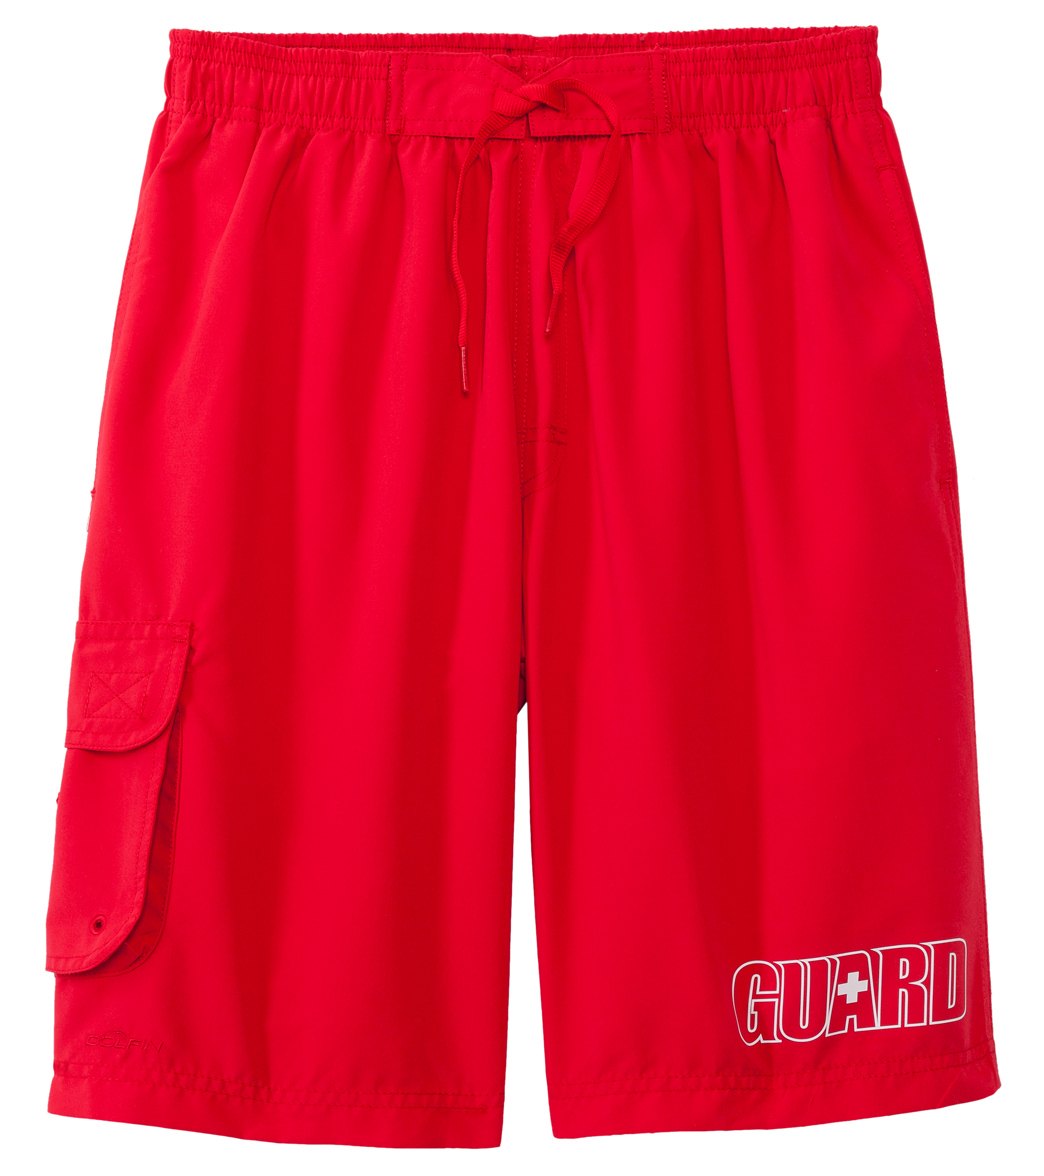 Dolfin Guard Board Short Swimsuit - Red Xl Polyester - Swimoutlet.com